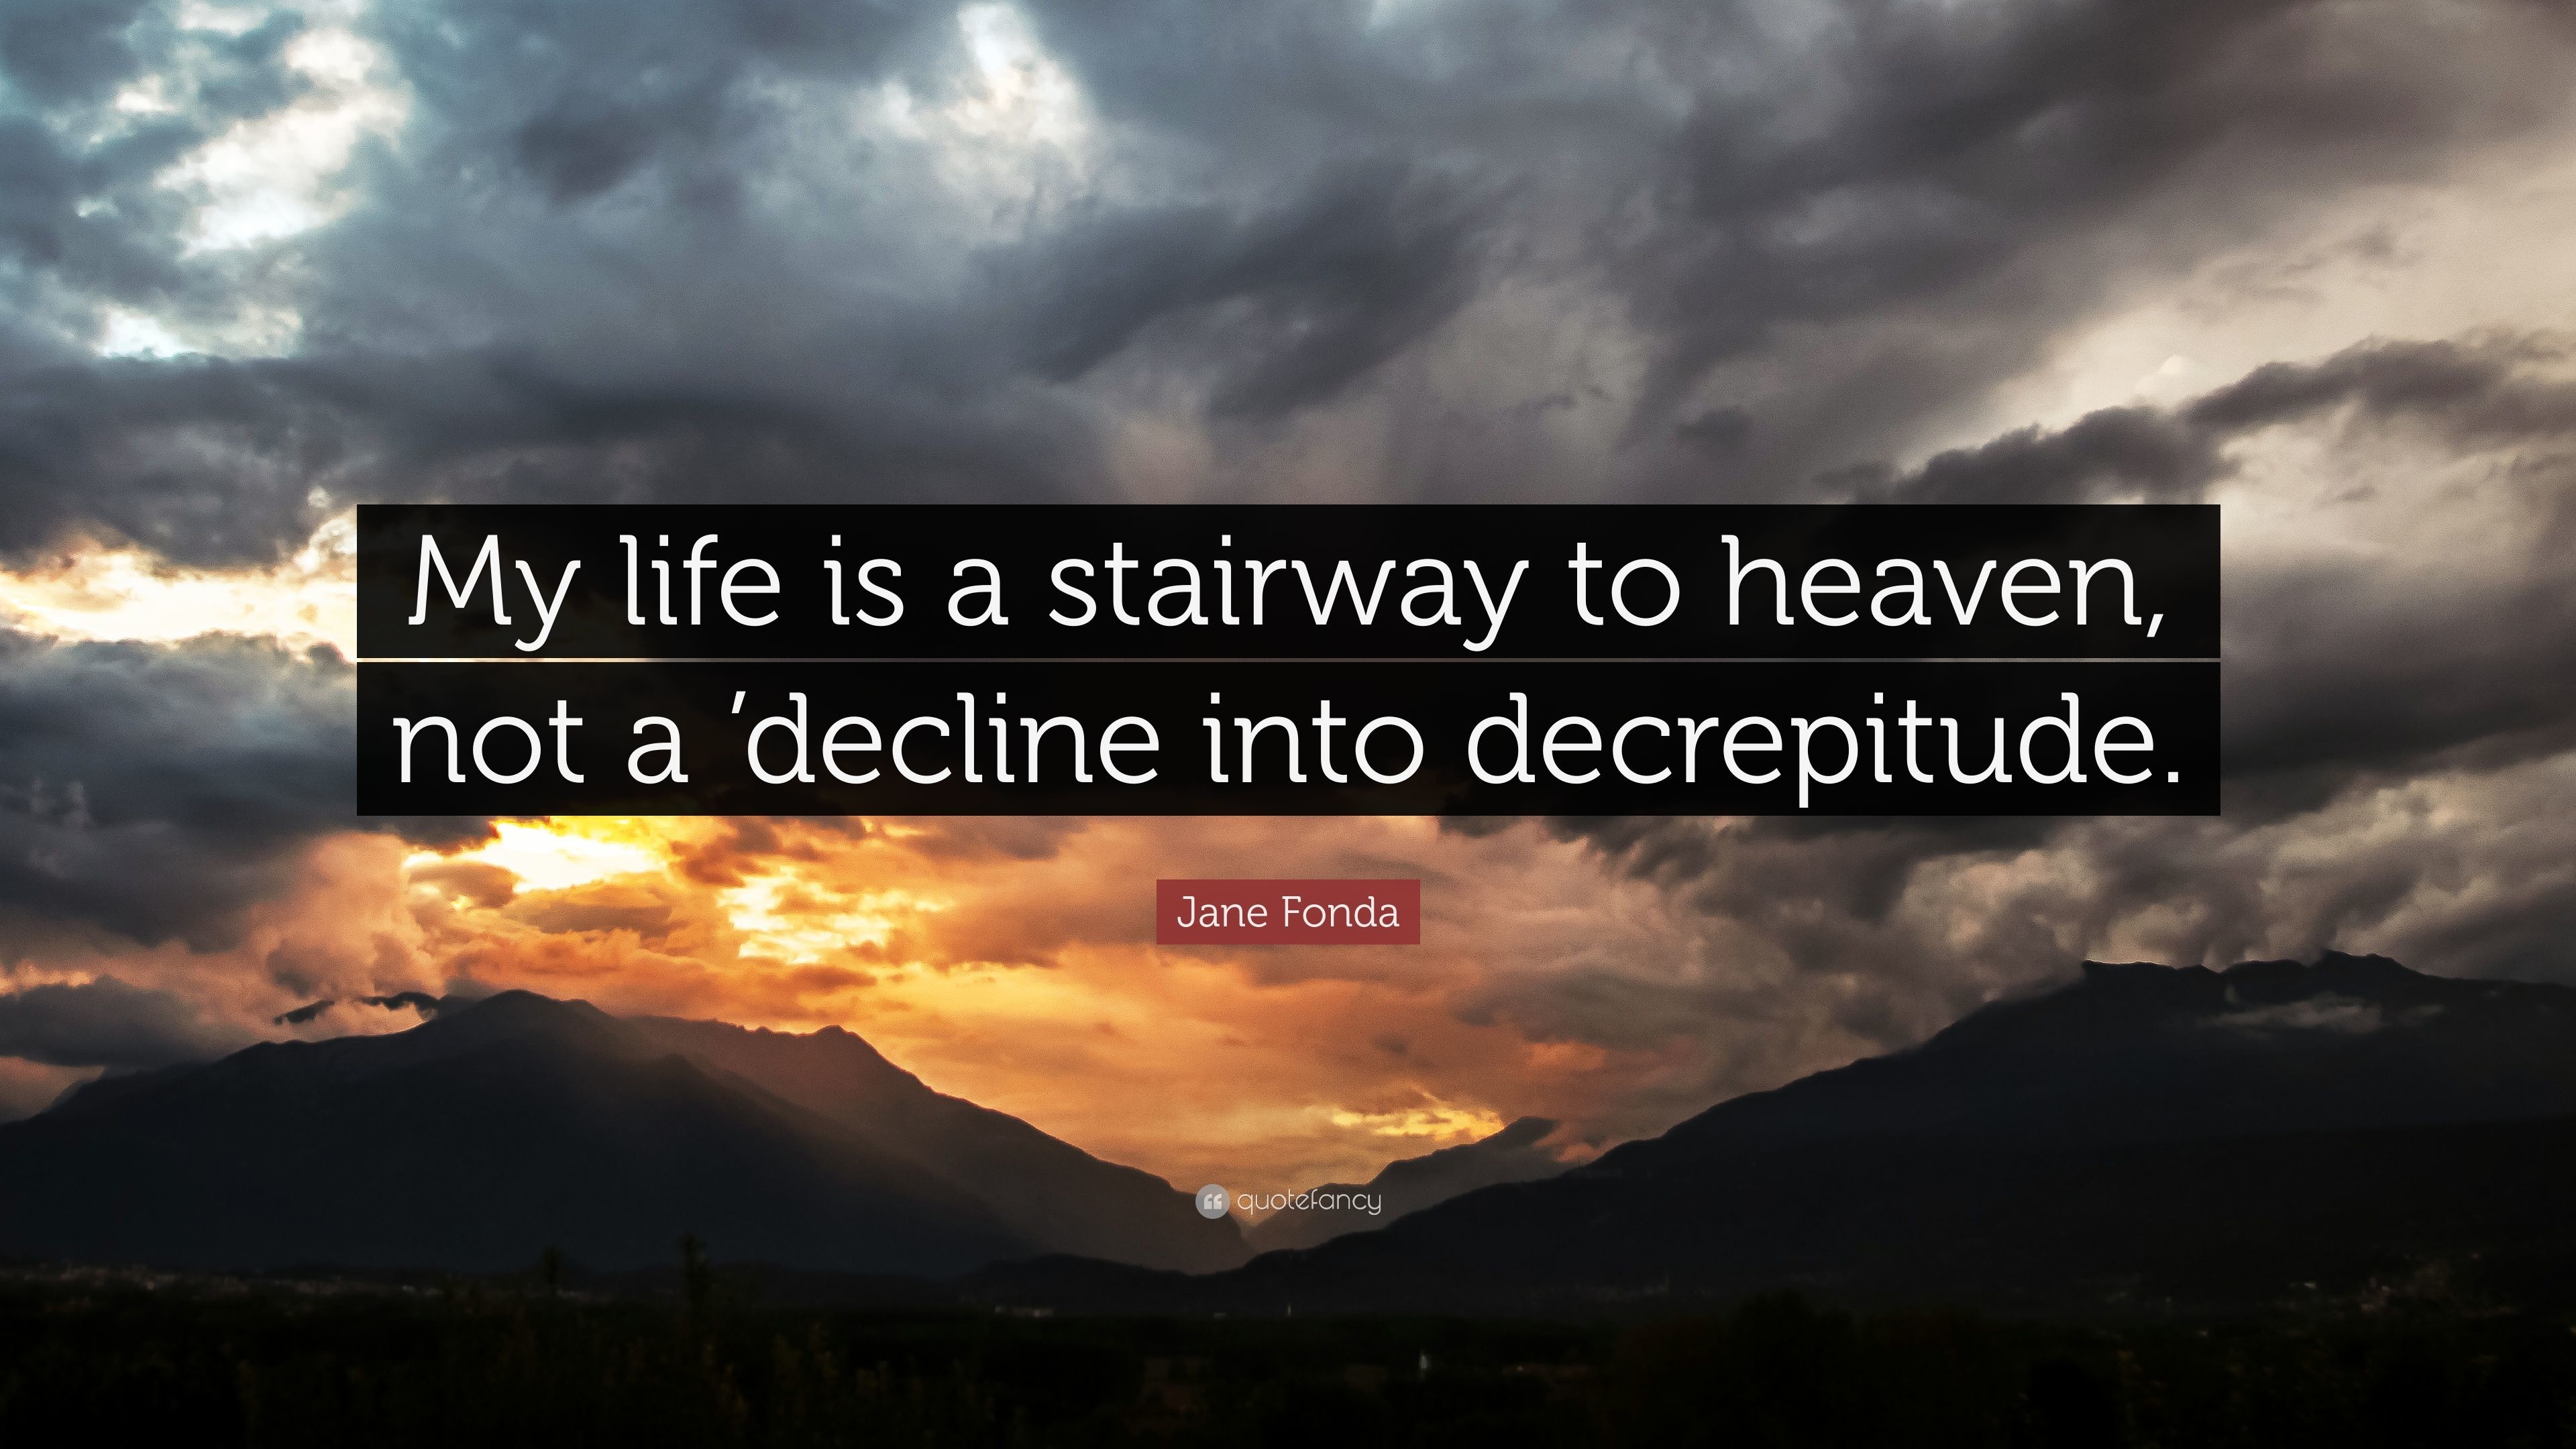 3840x2160 Jane Fonda Quote: “My life is a stairway to heaven, not a '